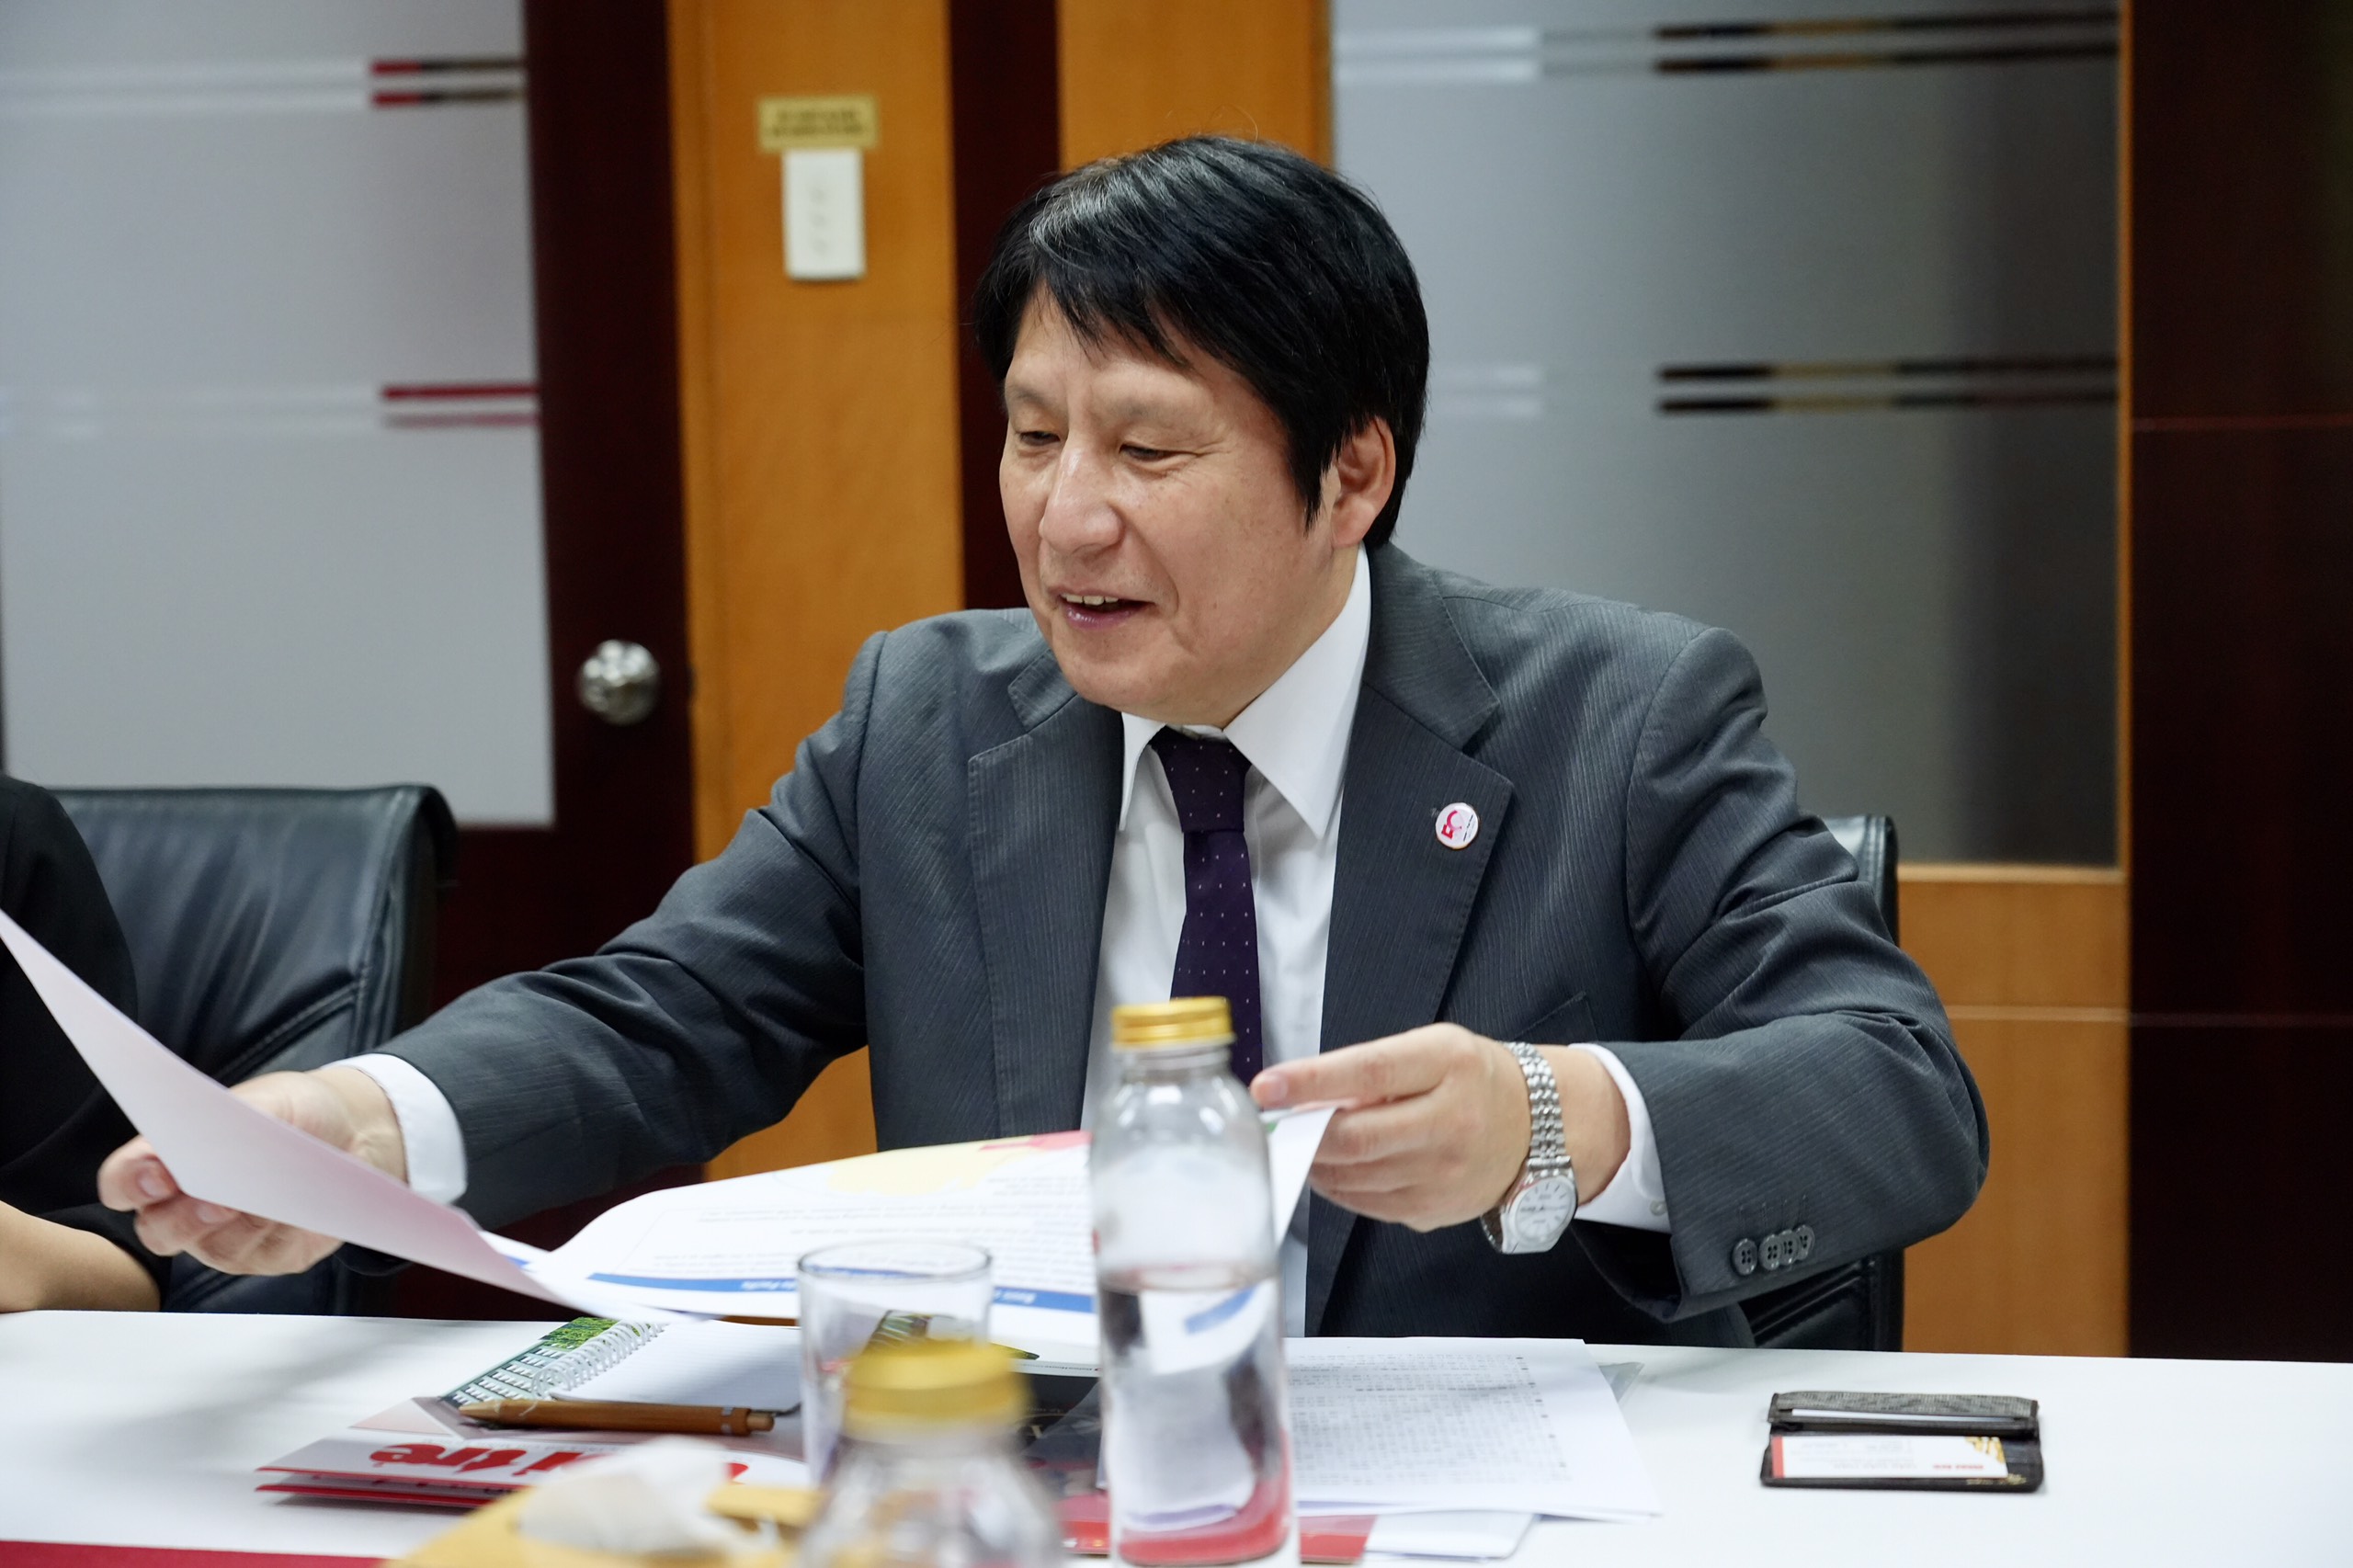 Japanese Consul General in Da Nang Yakabe Yoshinori speaks during his visit to Tuoi Tre Newspaper in Ho Chi Minh City on March 8, 2023. Photo: Huu Hanh / Tuoi Tre